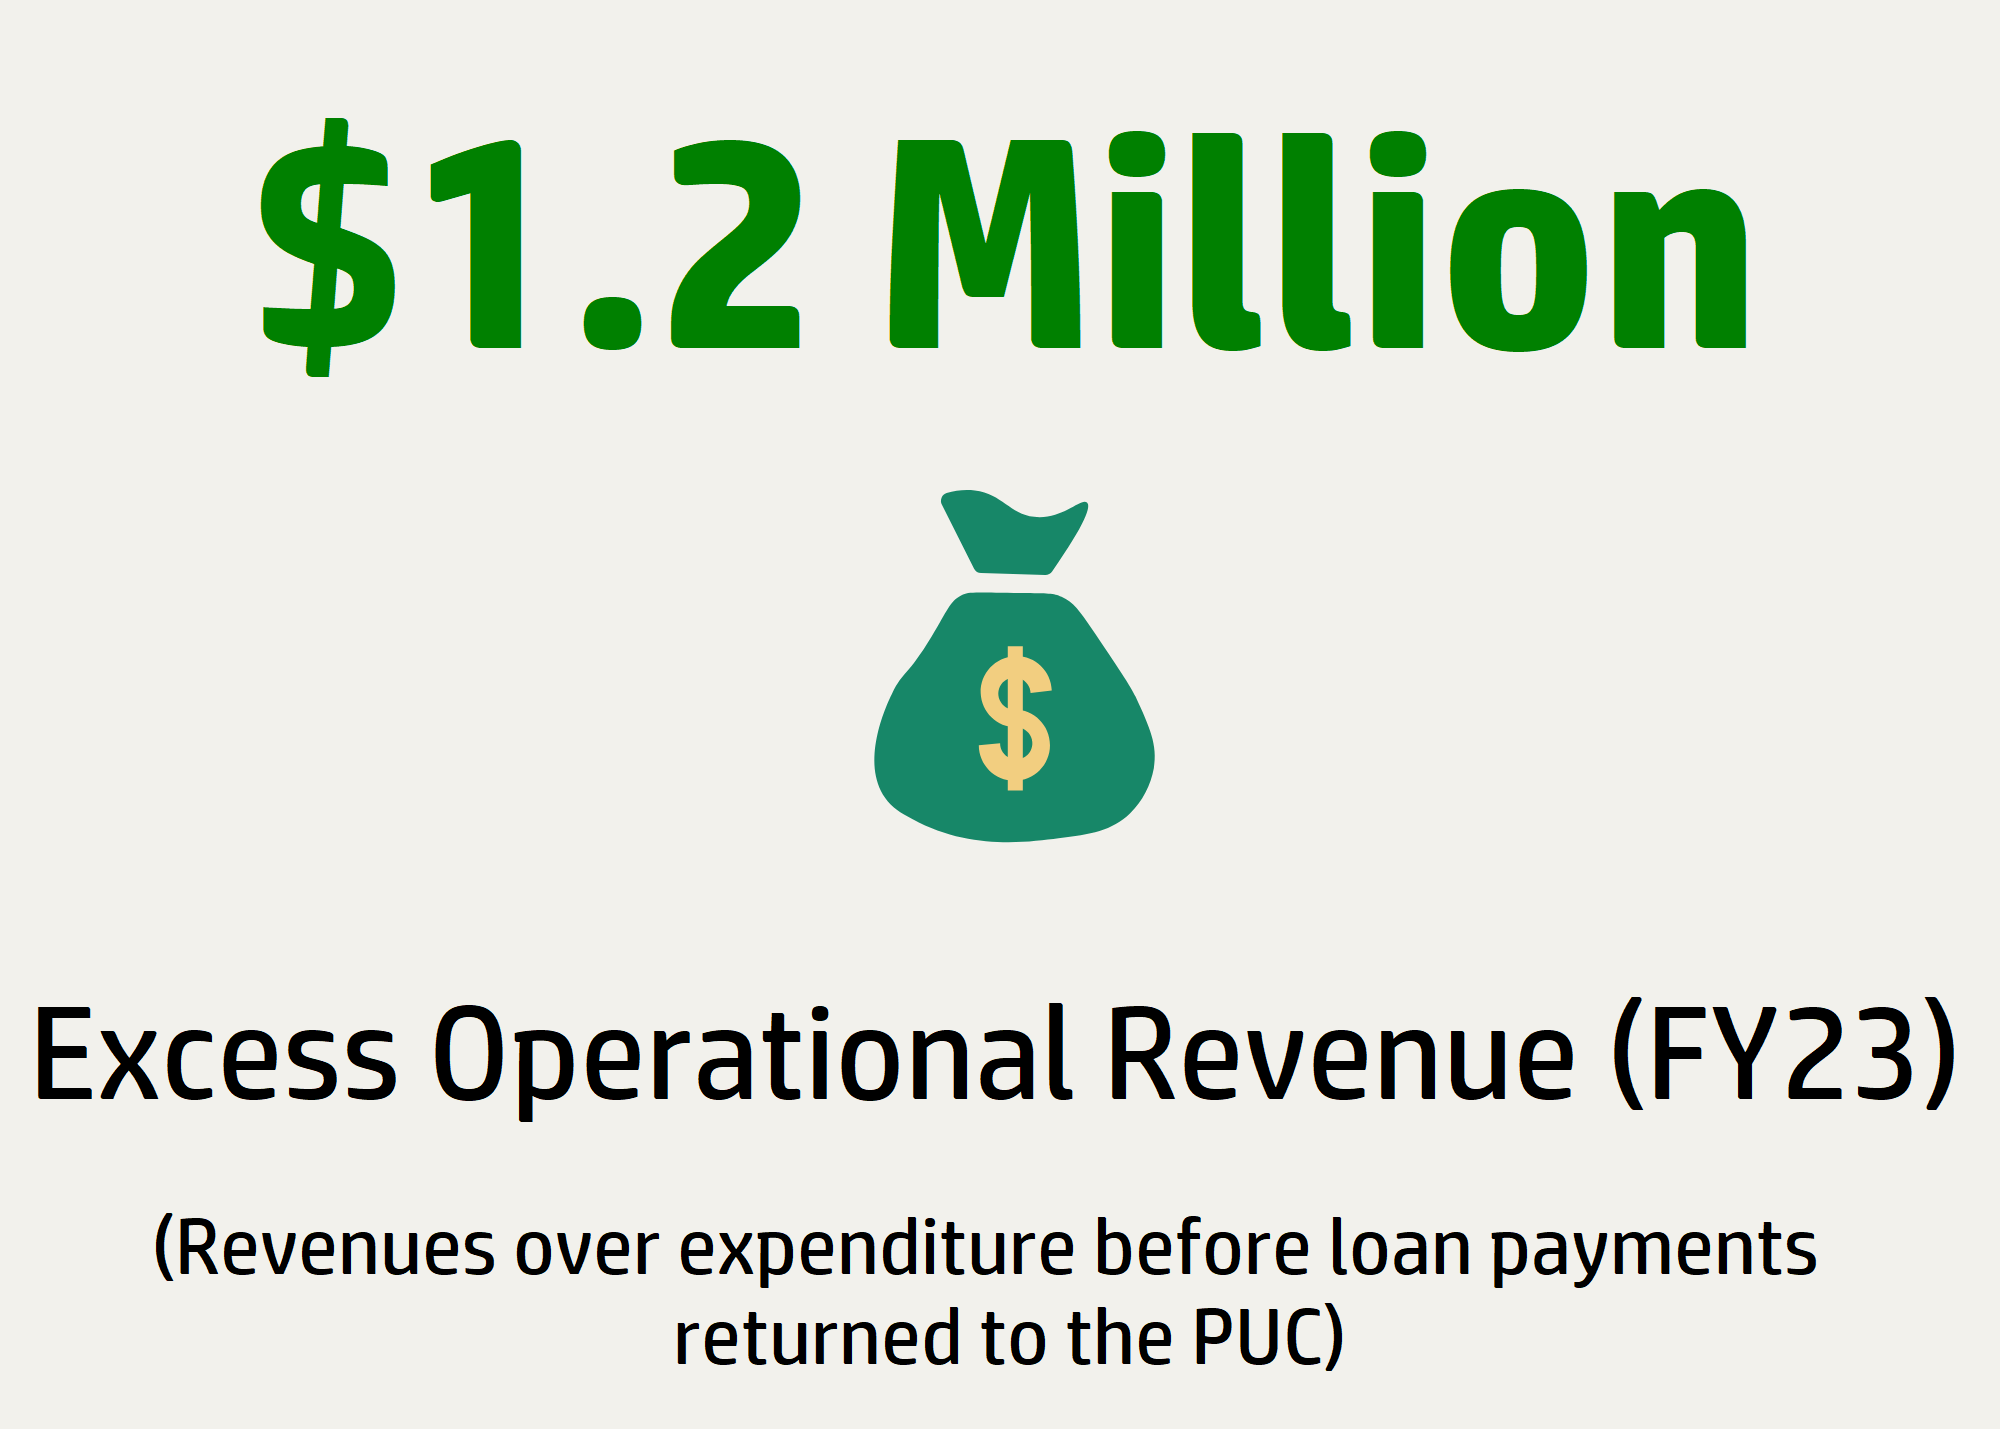 Excess operational revenue FY23: $1.2 million (revenues over expentidures before loan payments returned to PUC)